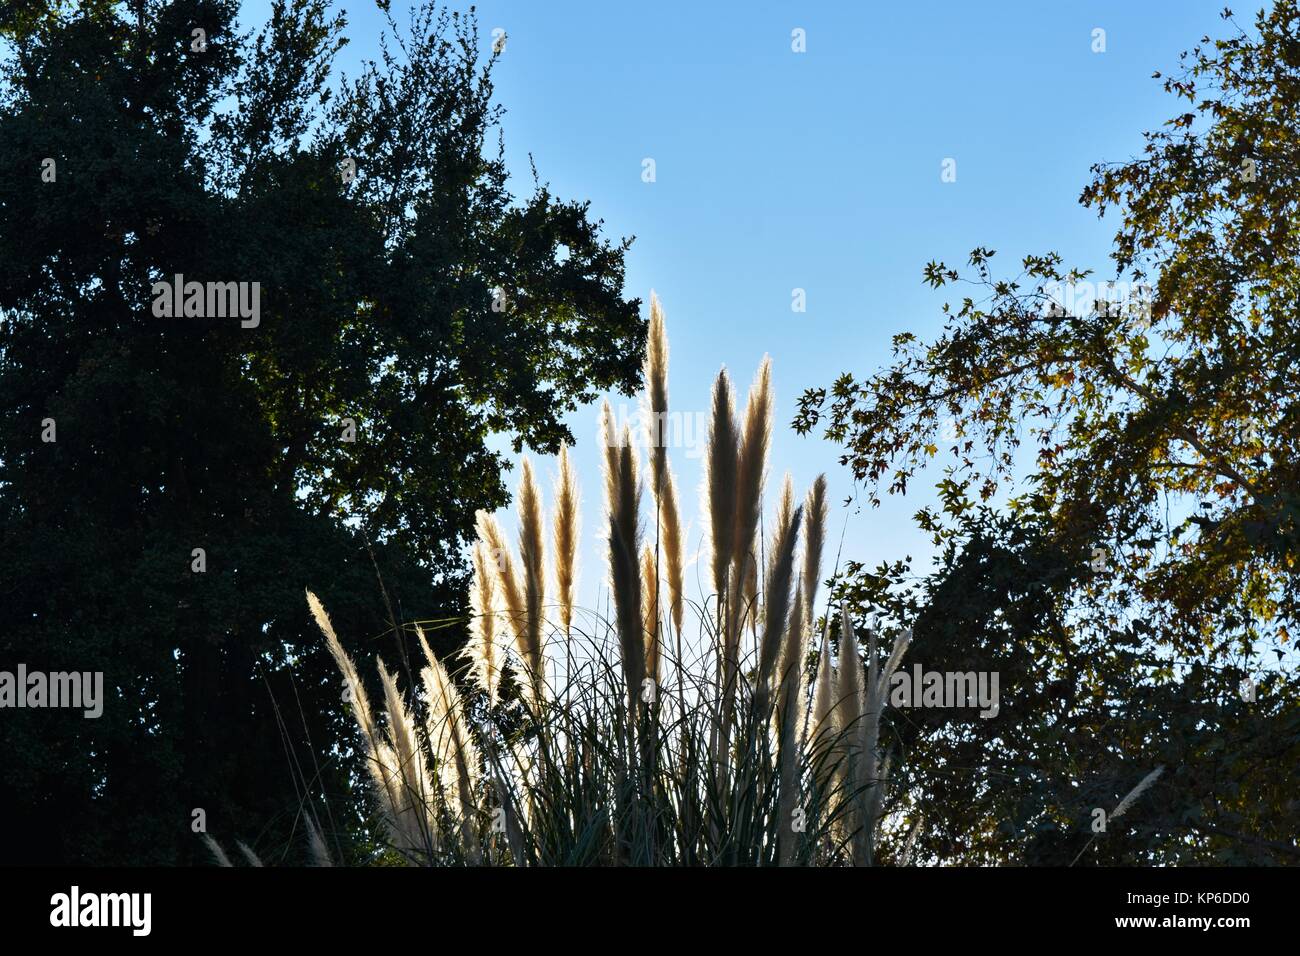 Sun shining behind feather grass with silhouette trees Stock Photo